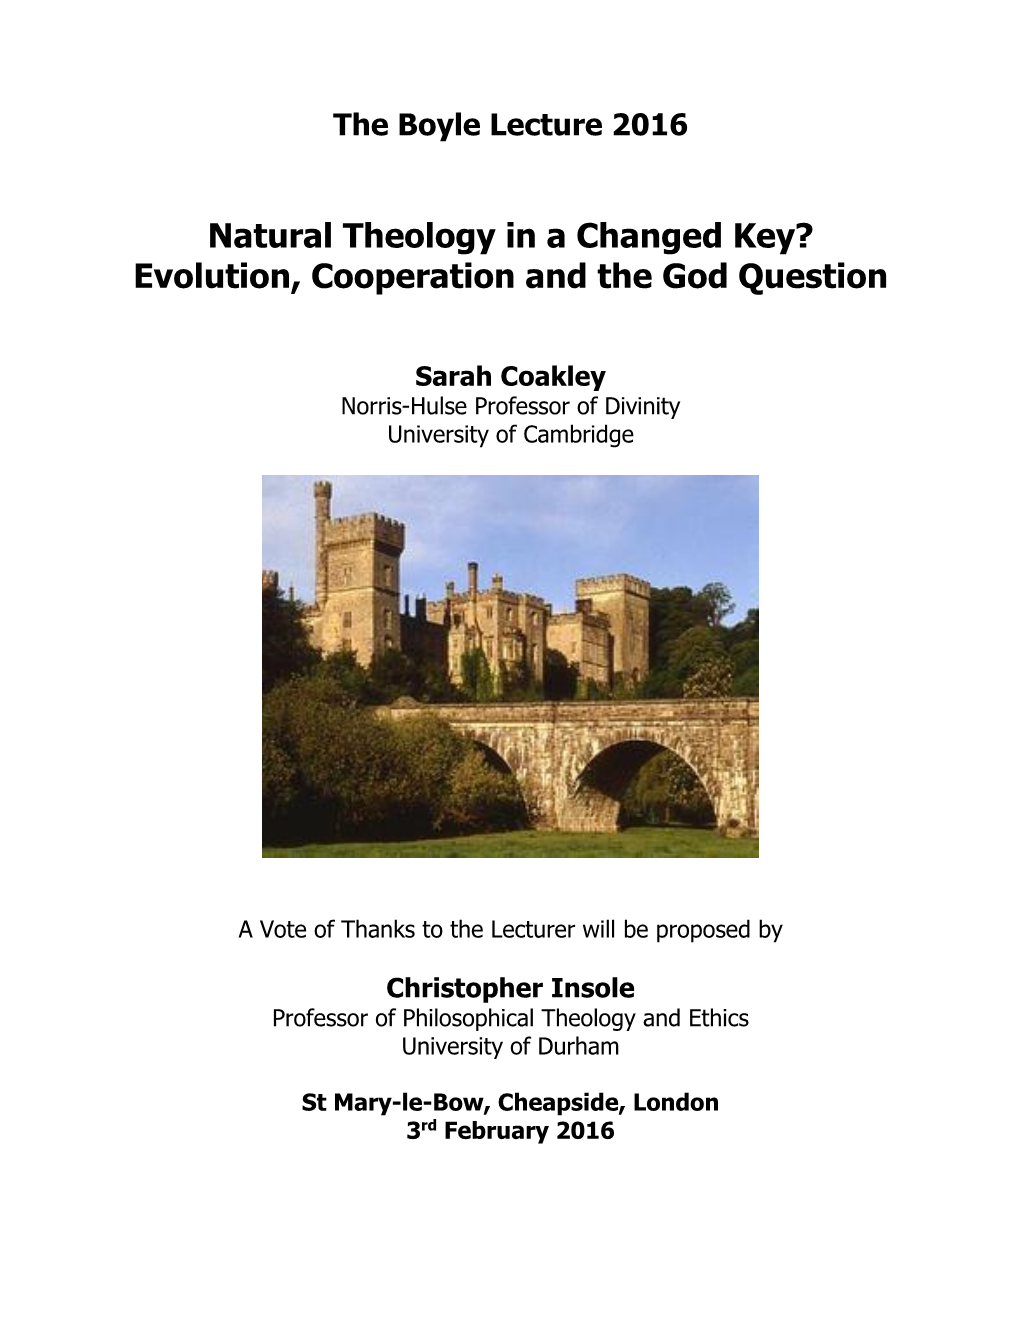 Natural Theology in a Changed Key? Evolution, Cooperation and the God Question